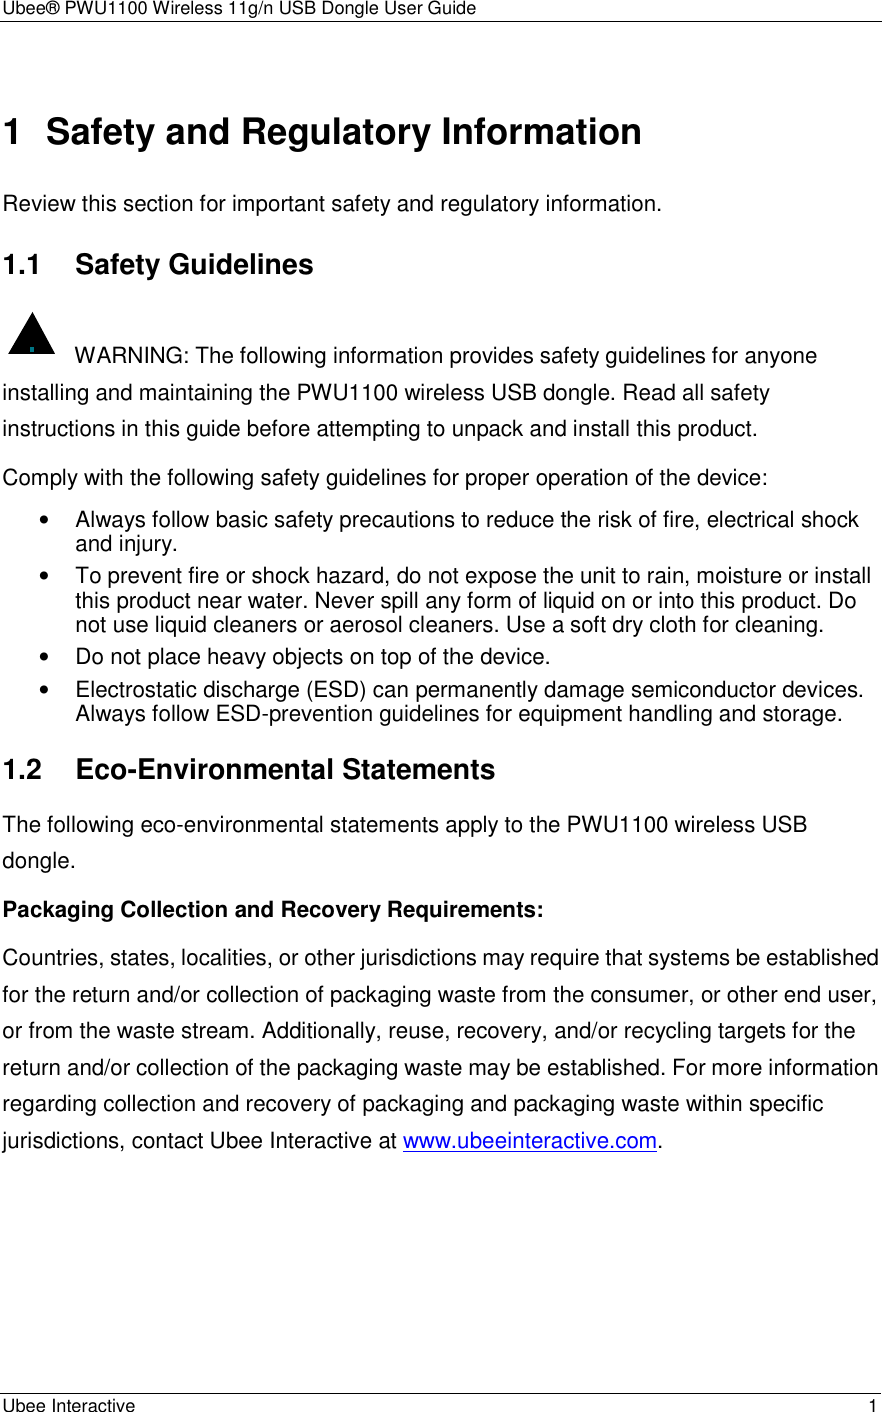 Ubee® PWU1100 Wireless 11g/n USB Dongle User Guide Ubee Interactive    1 1  Safety and Regulatory Information Review this section for important safety and regulatory information. 1.1 Safety Guidelines   WARNING: The following information provides safety guidelines for anyone installing and maintaining the PWU1100 wireless USB dongle. Read all safety instructions in this guide before attempting to unpack and install this product. Comply with the following safety guidelines for proper operation of the device: •  Always follow basic safety precautions to reduce the risk of fire, electrical shock and injury. •  To prevent fire or shock hazard, do not expose the unit to rain, moisture or install this product near water. Never spill any form of liquid on or into this product. Do not use liquid cleaners or aerosol cleaners. Use a soft dry cloth for cleaning. •  Do not place heavy objects on top of the device. •  Electrostatic discharge (ESD) can permanently damage semiconductor devices. Always follow ESD-prevention guidelines for equipment handling and storage. 1.2 Eco-Environmental Statements The following eco-environmental statements apply to the PWU1100 wireless USB dongle. Packaging Collection and Recovery Requirements: Countries, states, localities, or other jurisdictions may require that systems be established for the return and/or collection of packaging waste from the consumer, or other end user, or from the waste stream. Additionally, reuse, recovery, and/or recycling targets for the return and/or collection of the packaging waste may be established. For more information regarding collection and recovery of packaging and packaging waste within specific jurisdictions, contact Ubee Interactive at www.ubeeinteractive.com.     